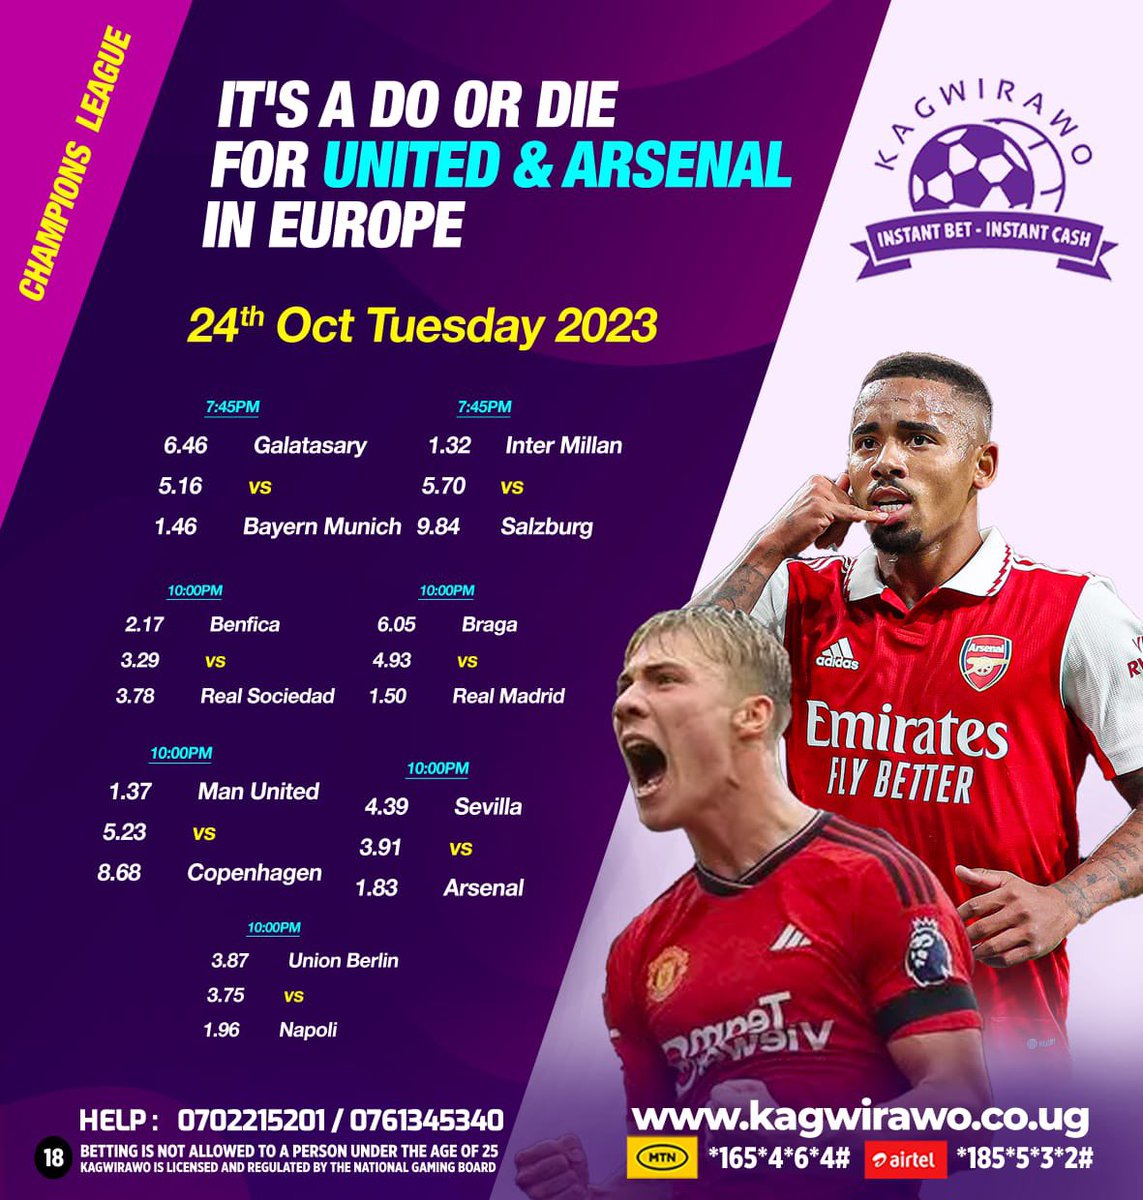 Champions League football returns tonight with Arsenal and Man United in action You have a chance to make some money when you bet via kagwirawo.co.ug #KagwirawoUpdates | #UCL